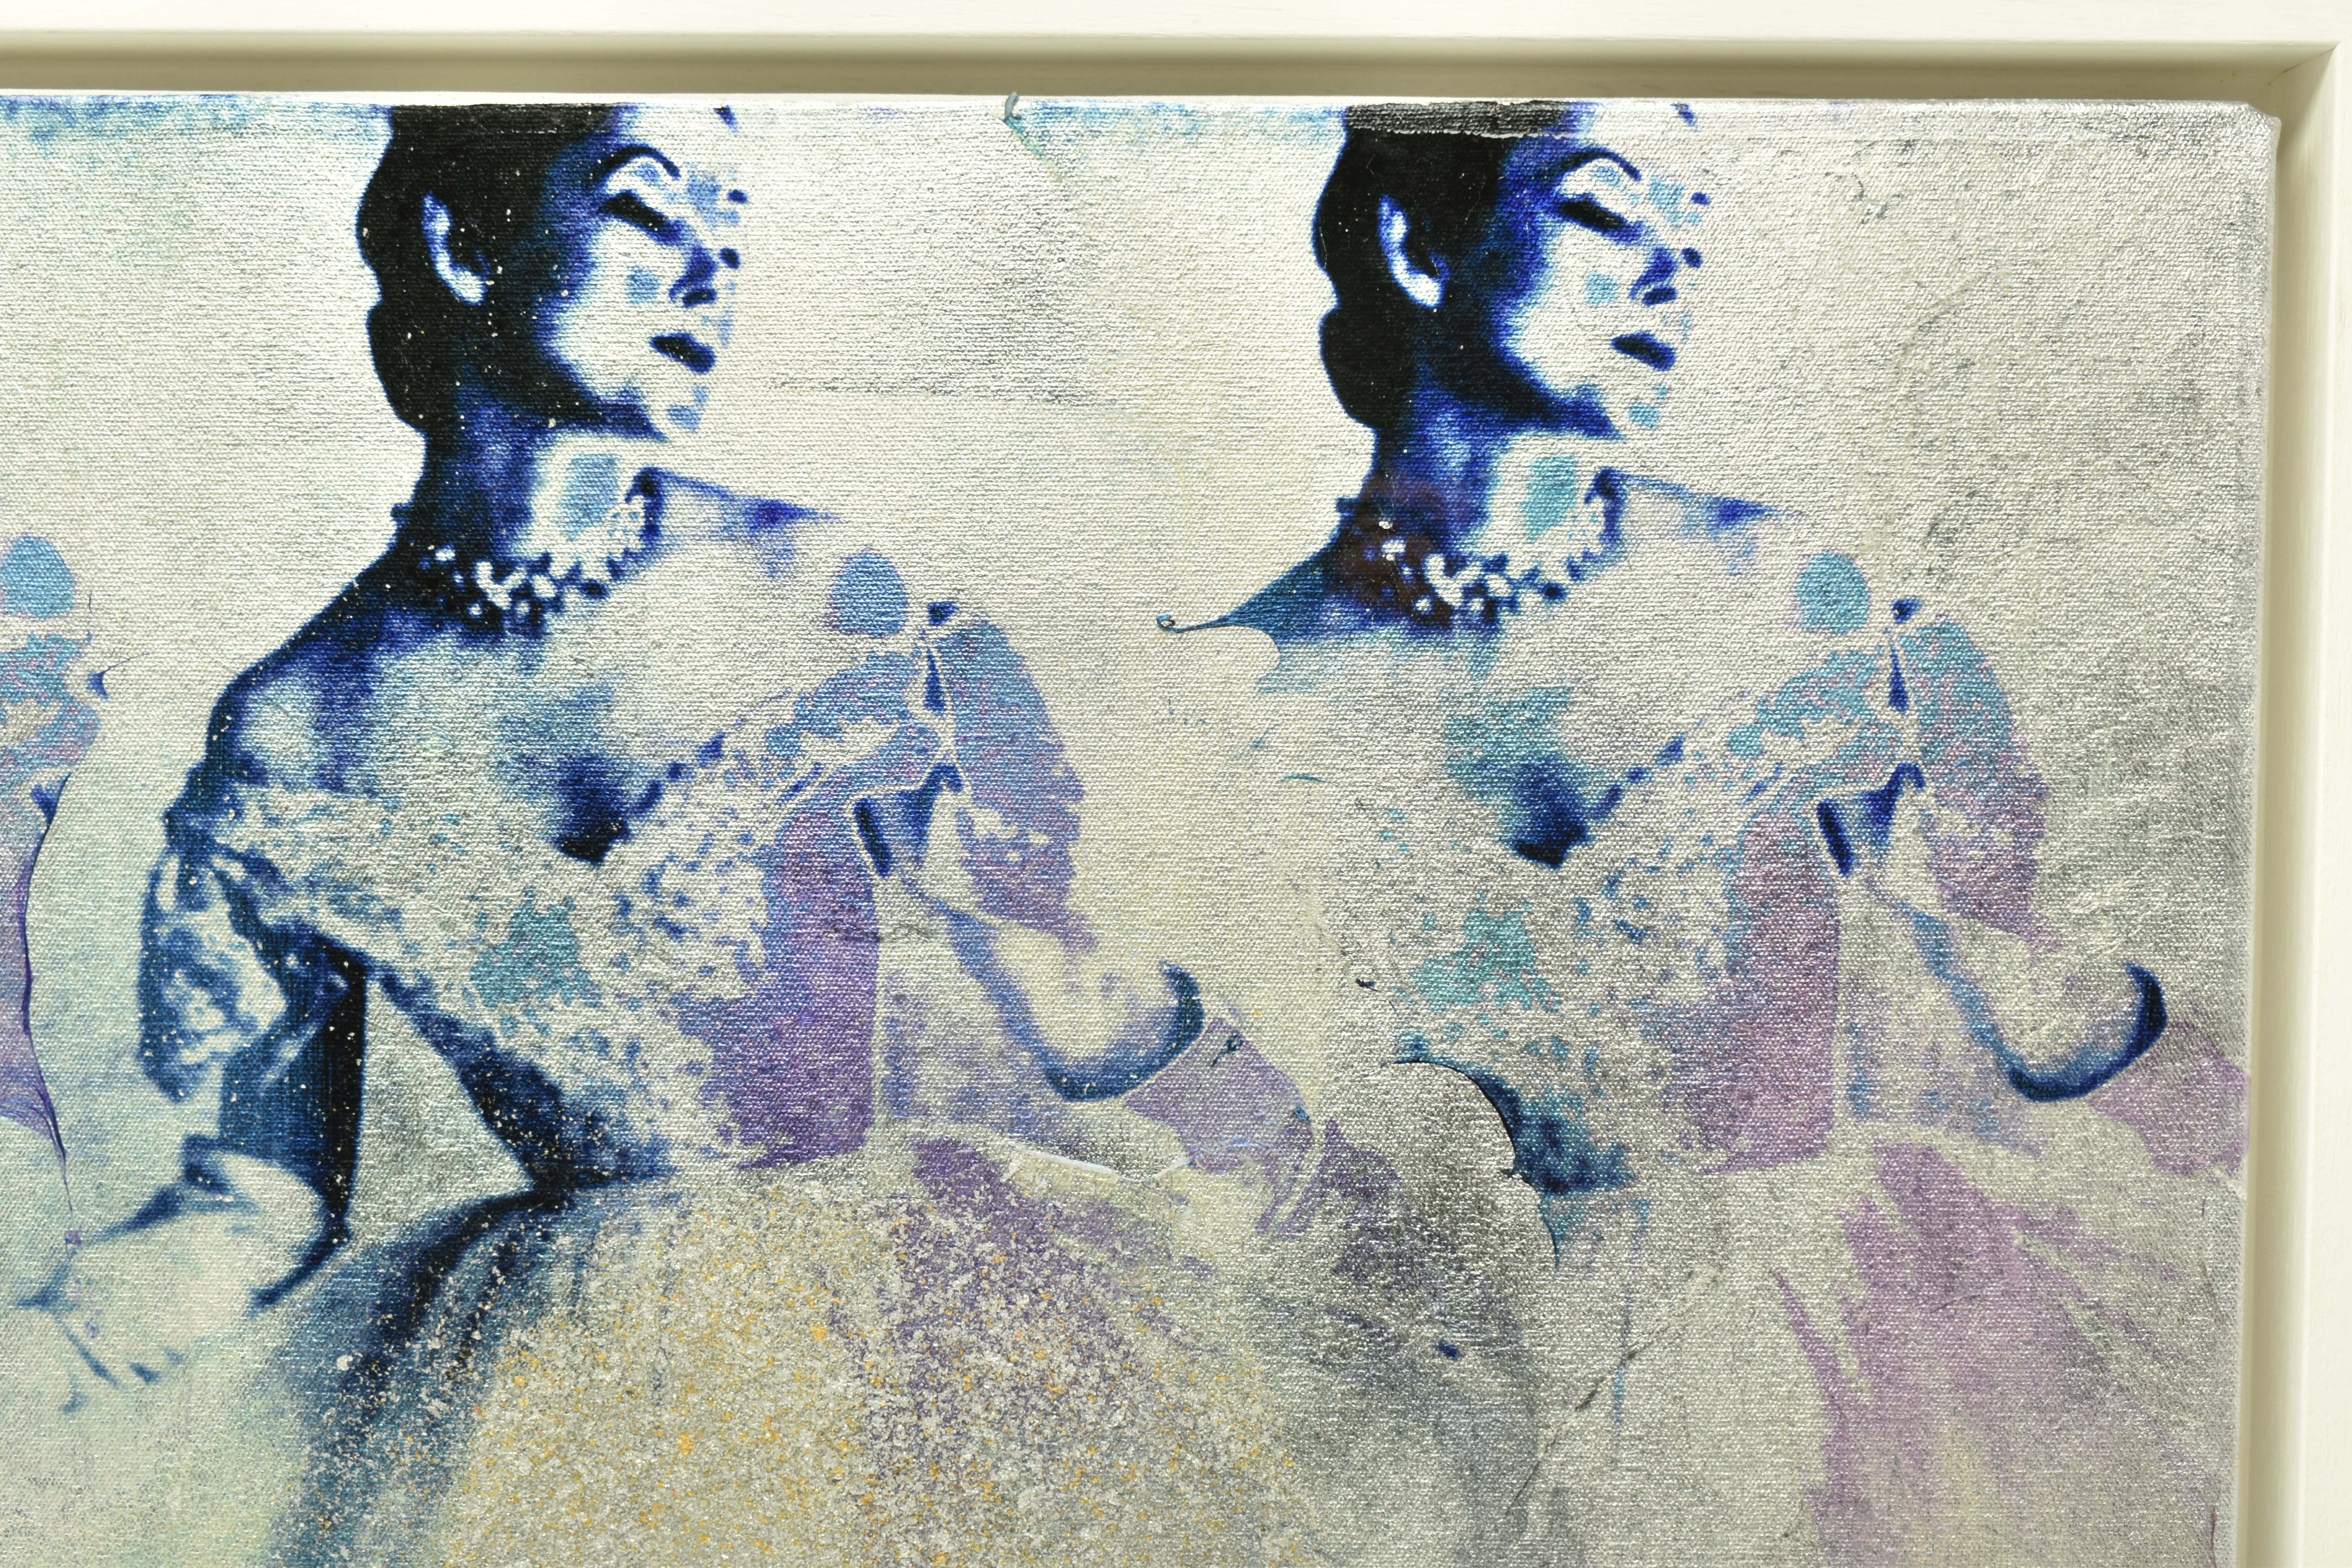 PEZHMAN (IRAN / AMERICA 1976) 'BOUDOIR V', depicting three images of a female figure, signed - Image 4 of 7